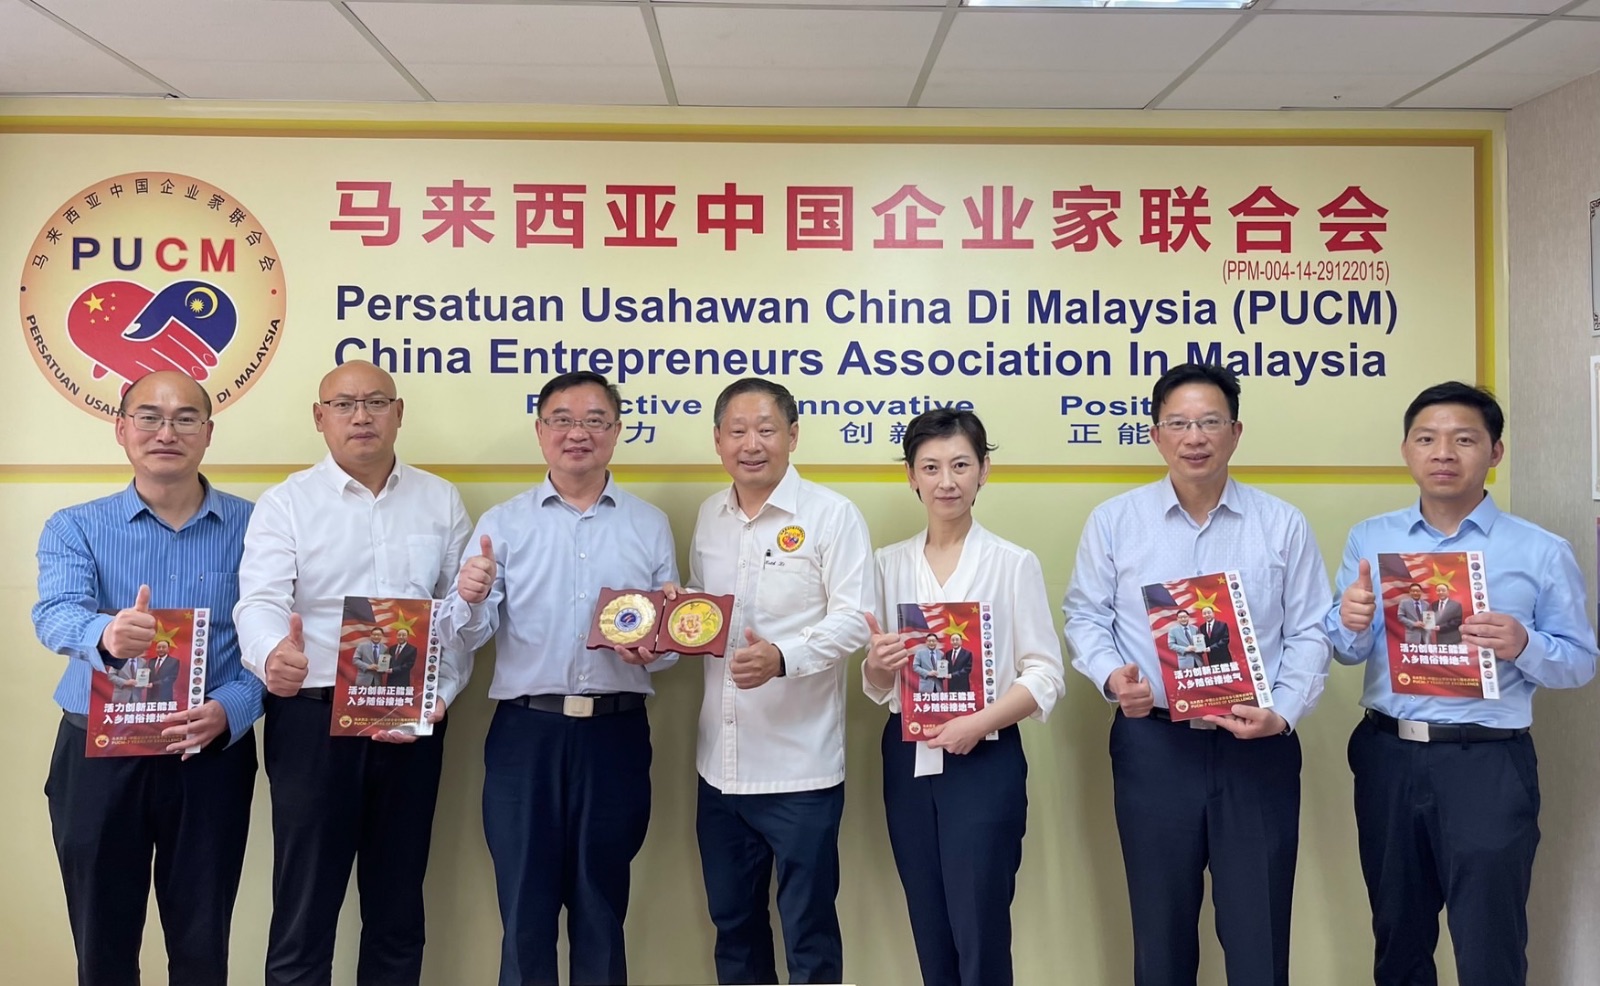 JIangsu Ocean university delegation pays courtesy call to PUCM